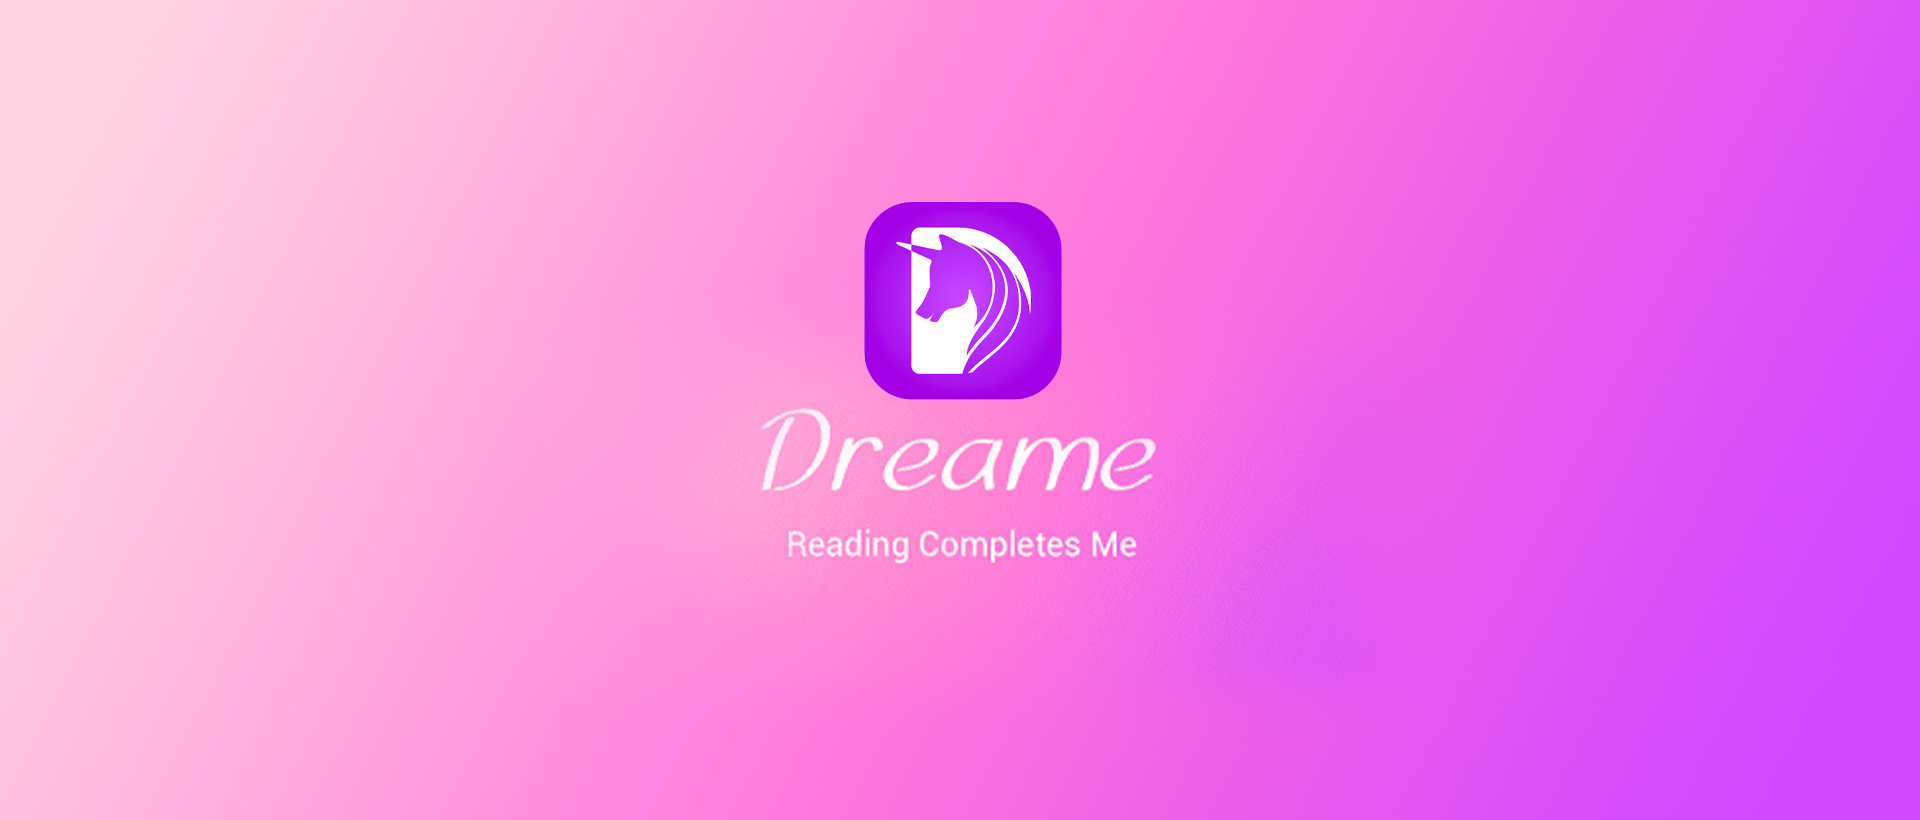 Dreame App: How To Get Redemption Code For Dreame App?